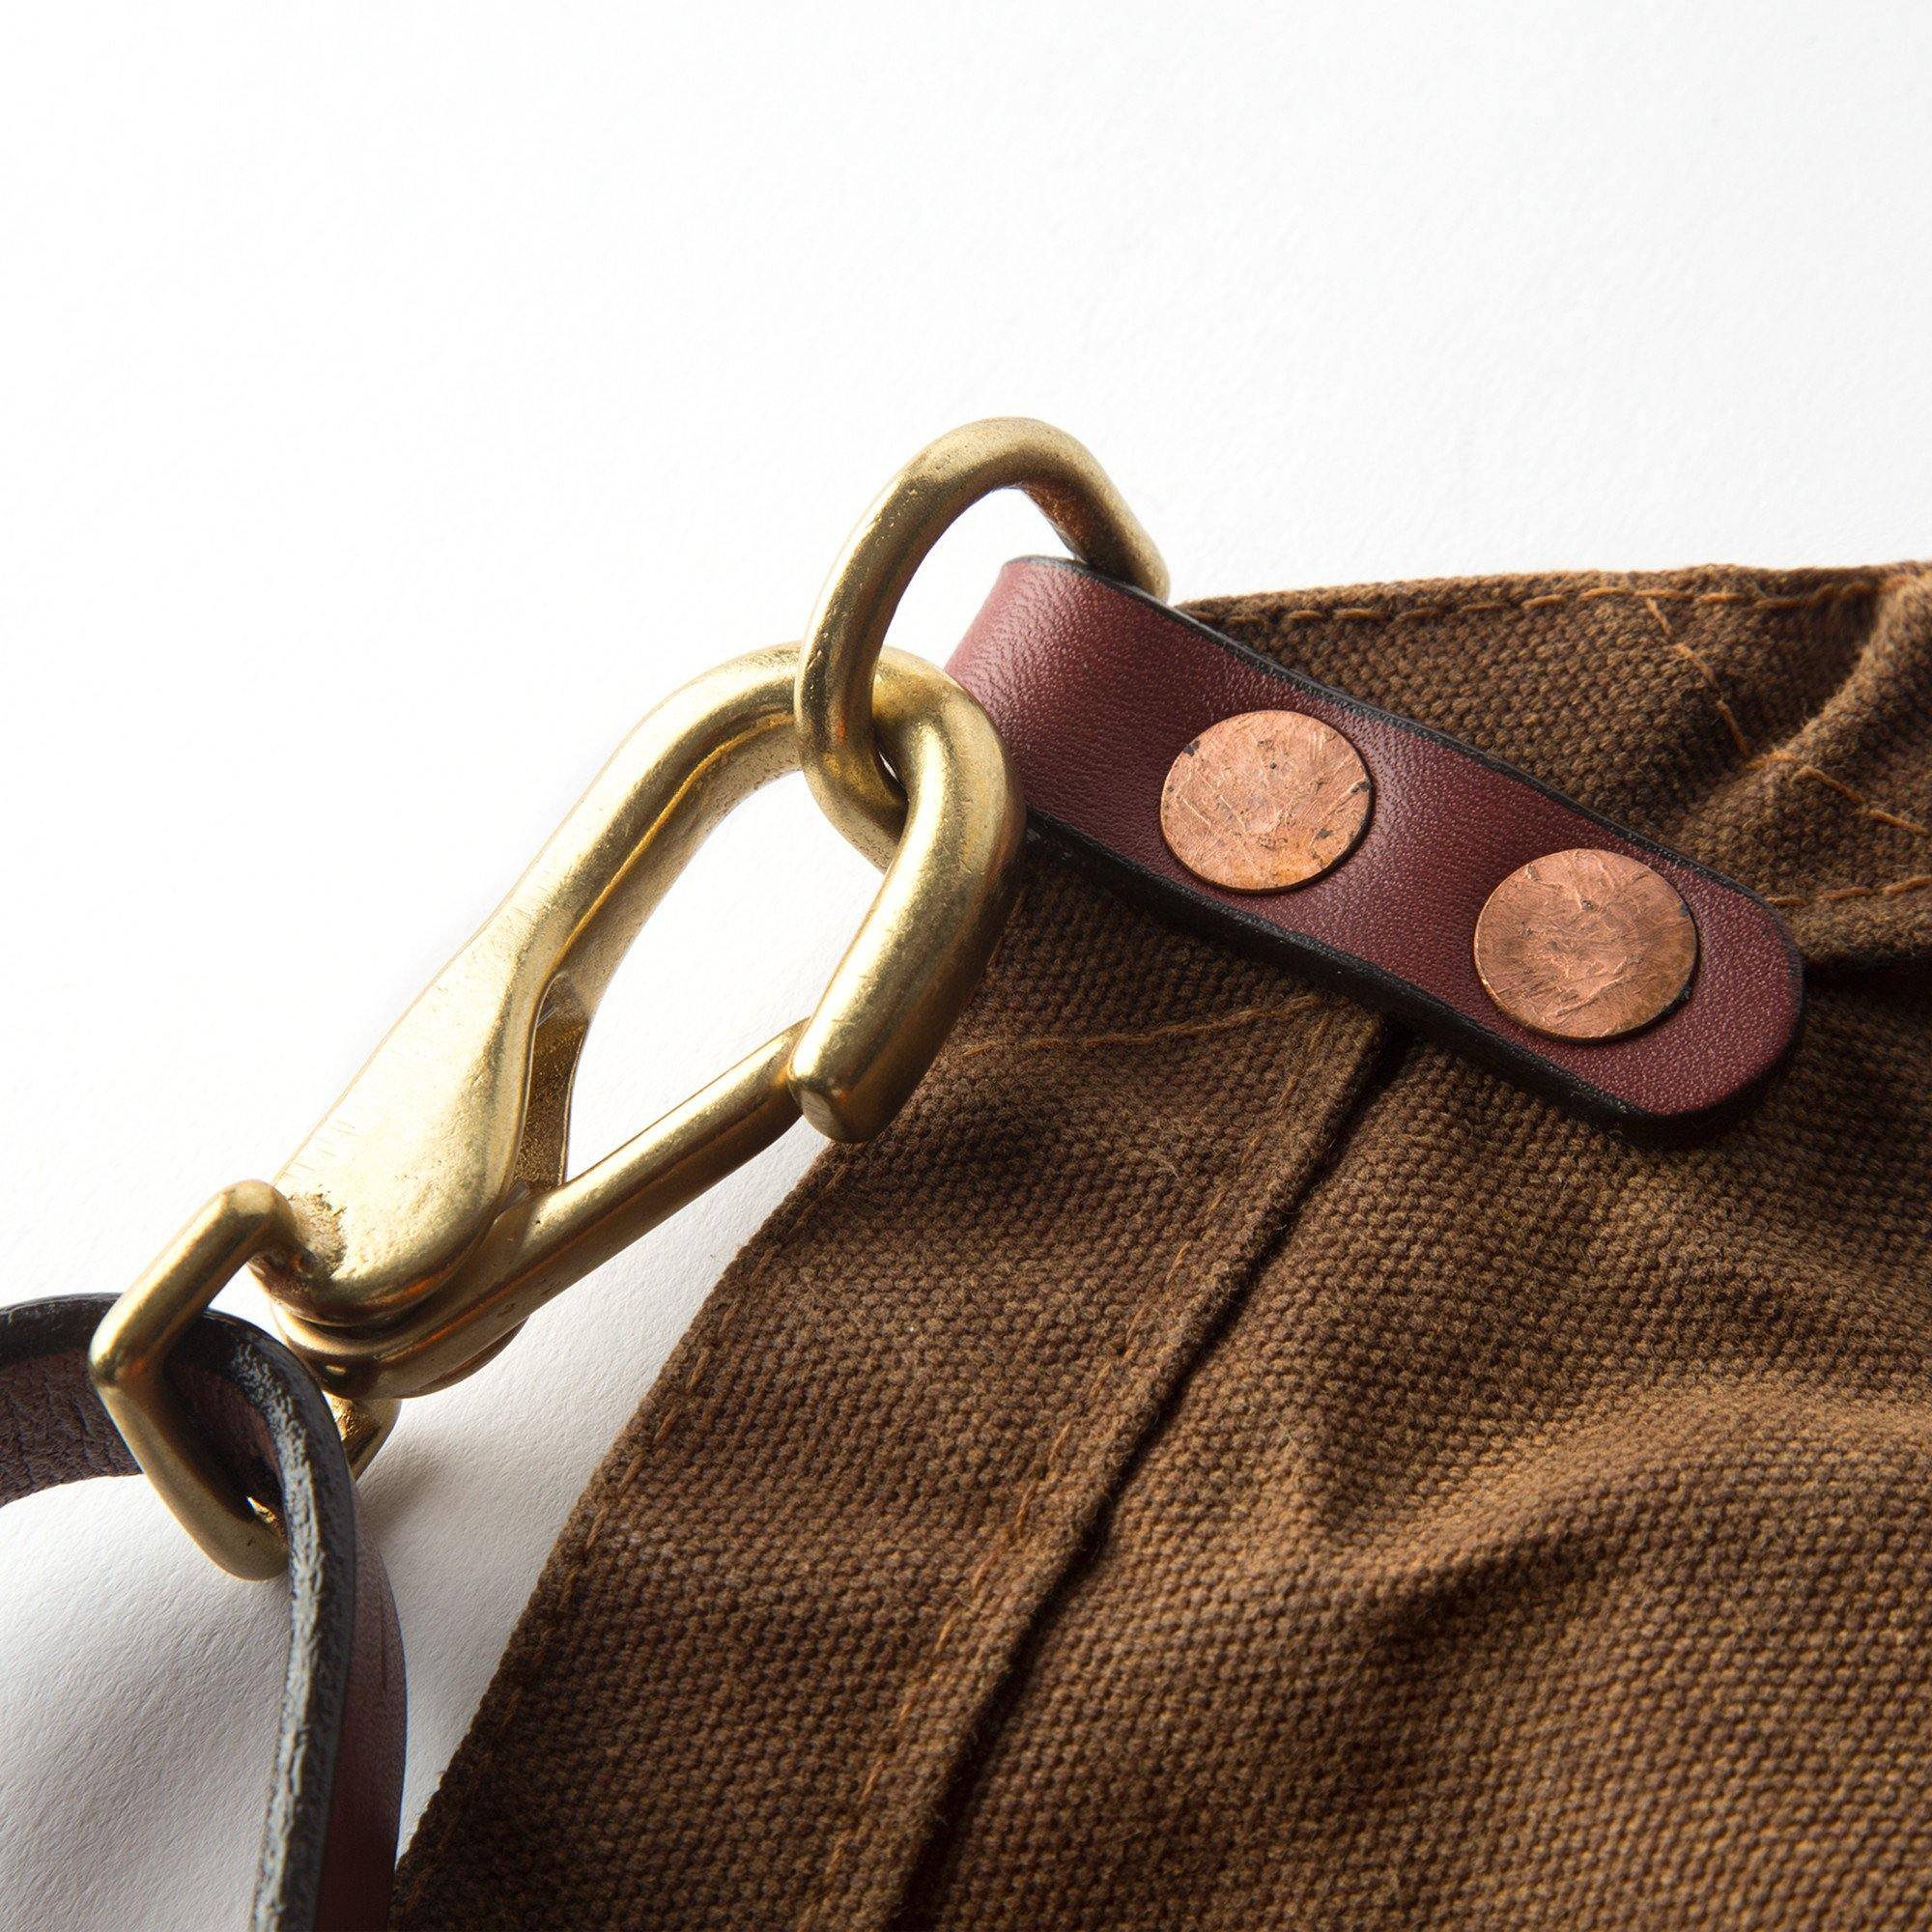 Waxed Canvas and Leather Apron Work Apron